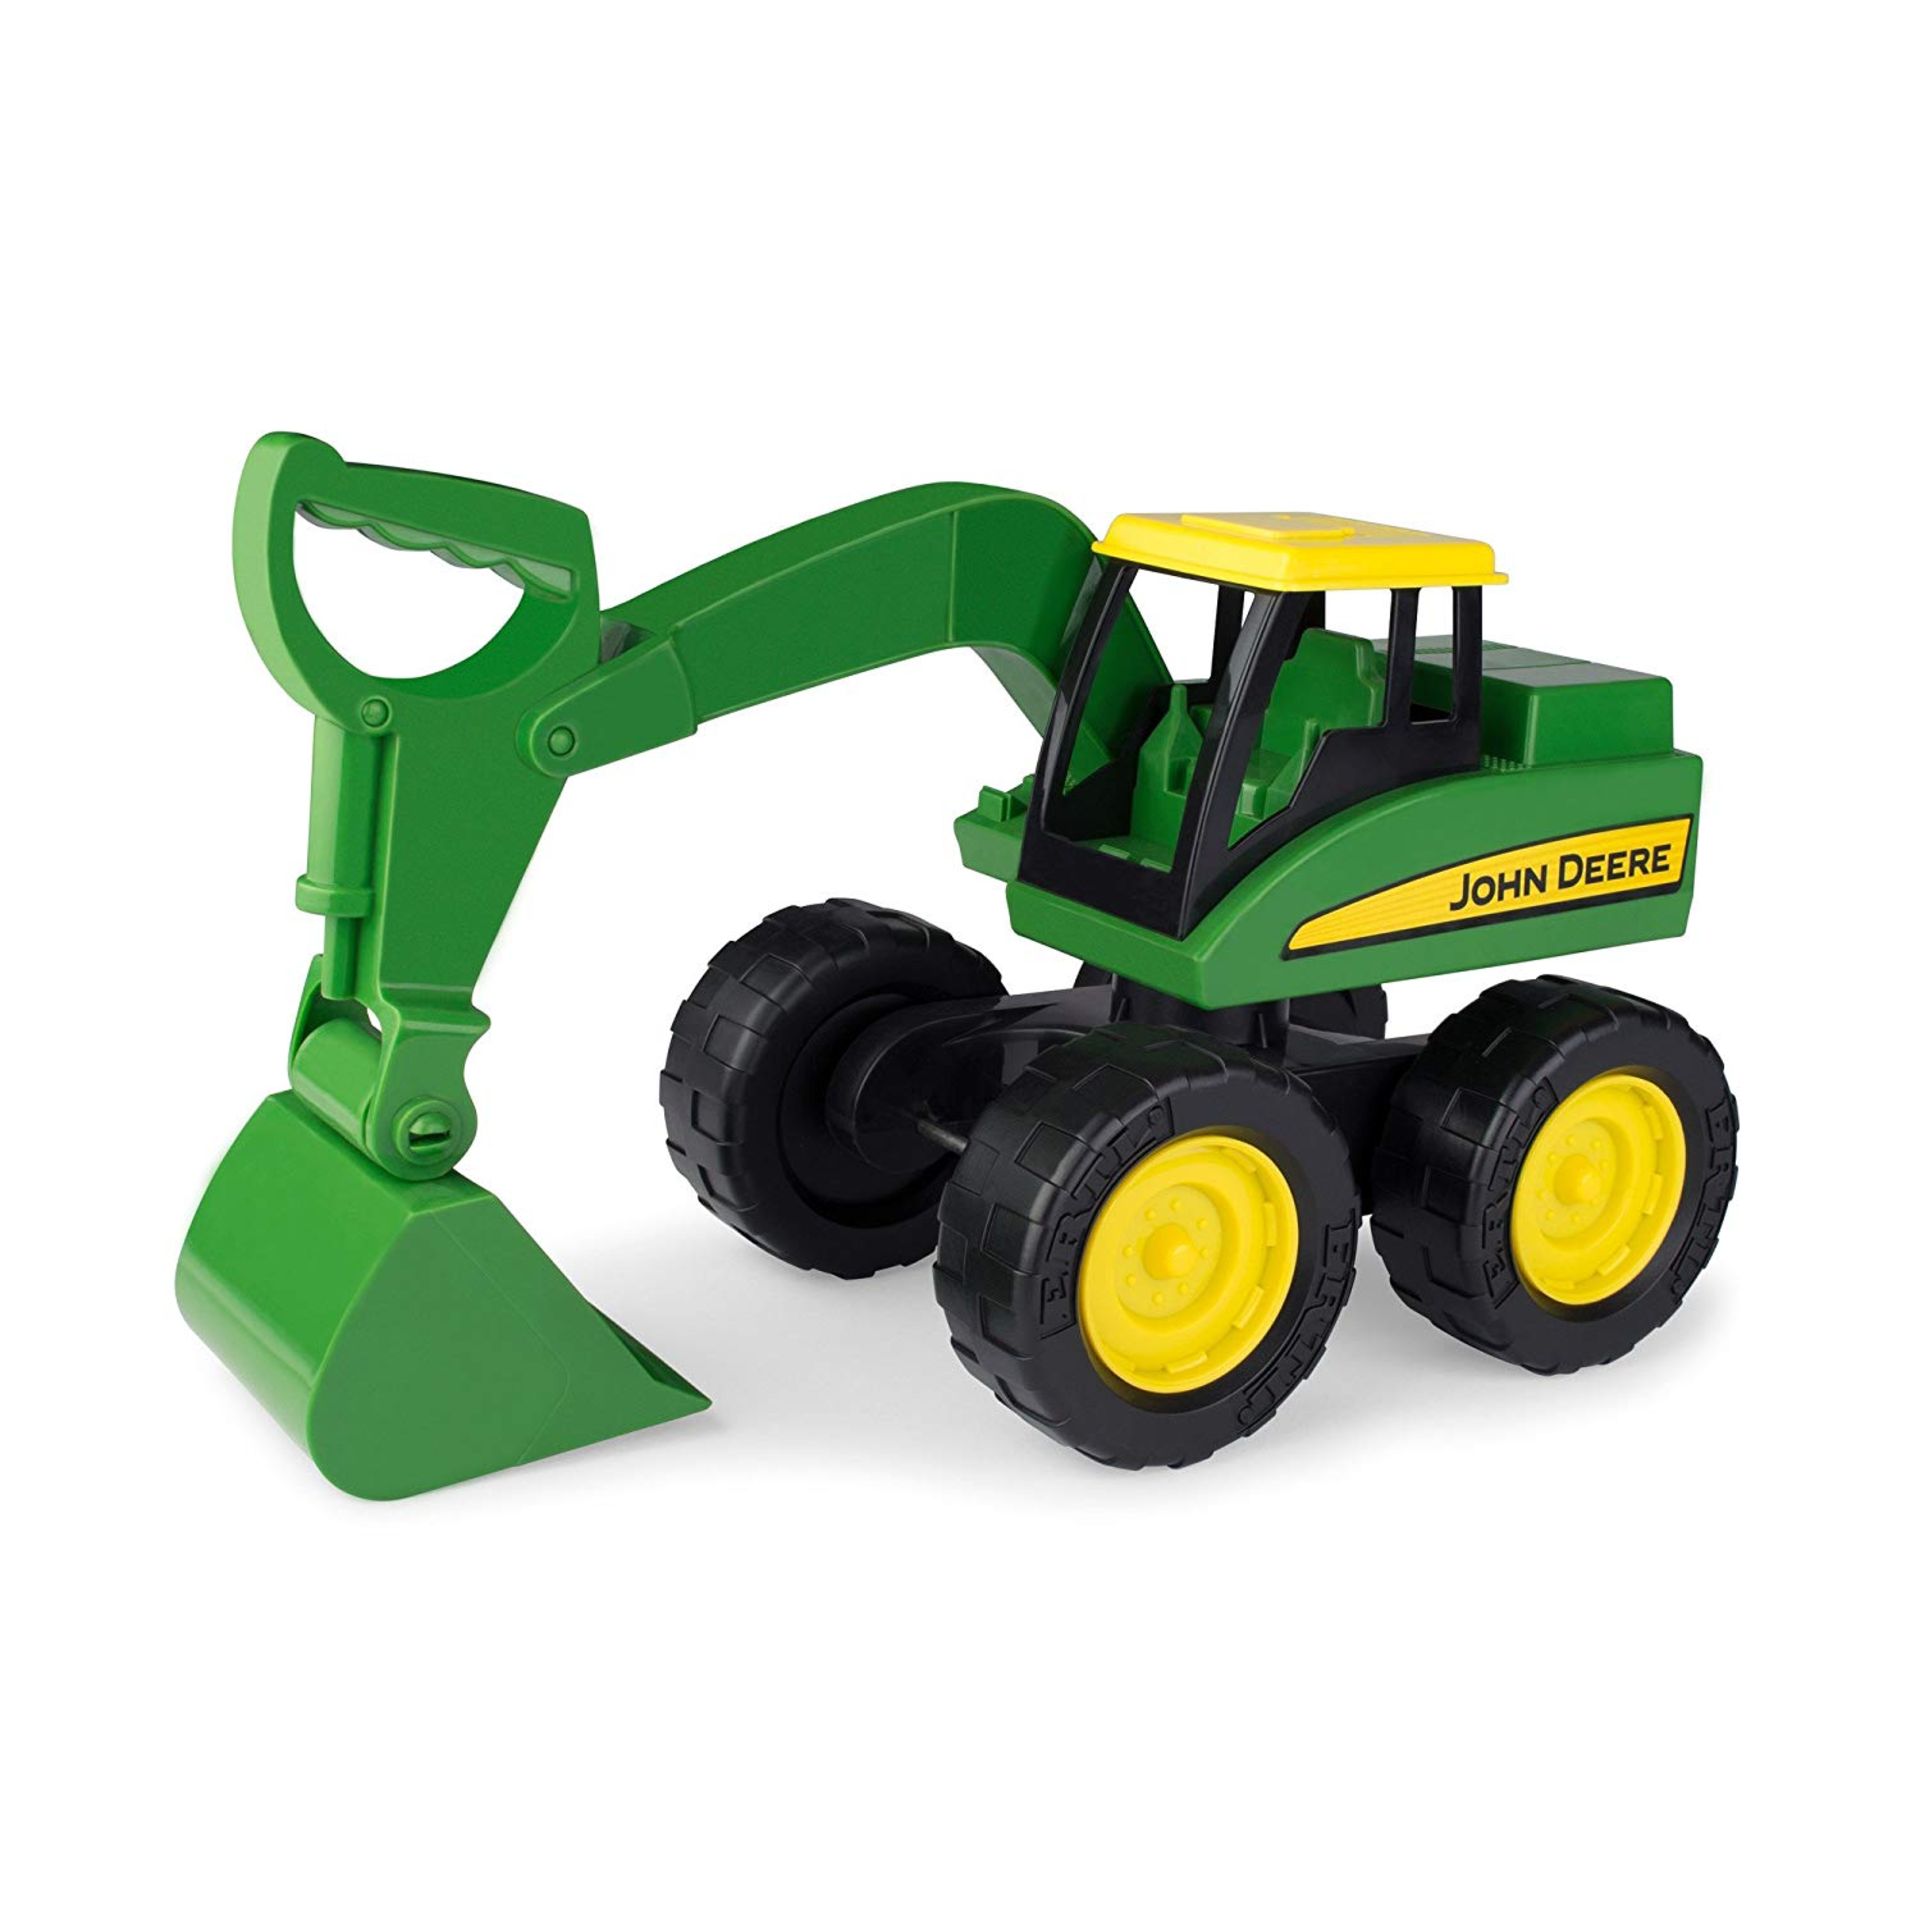 8 x Tractor / excavators as listed RRP£ 129.87